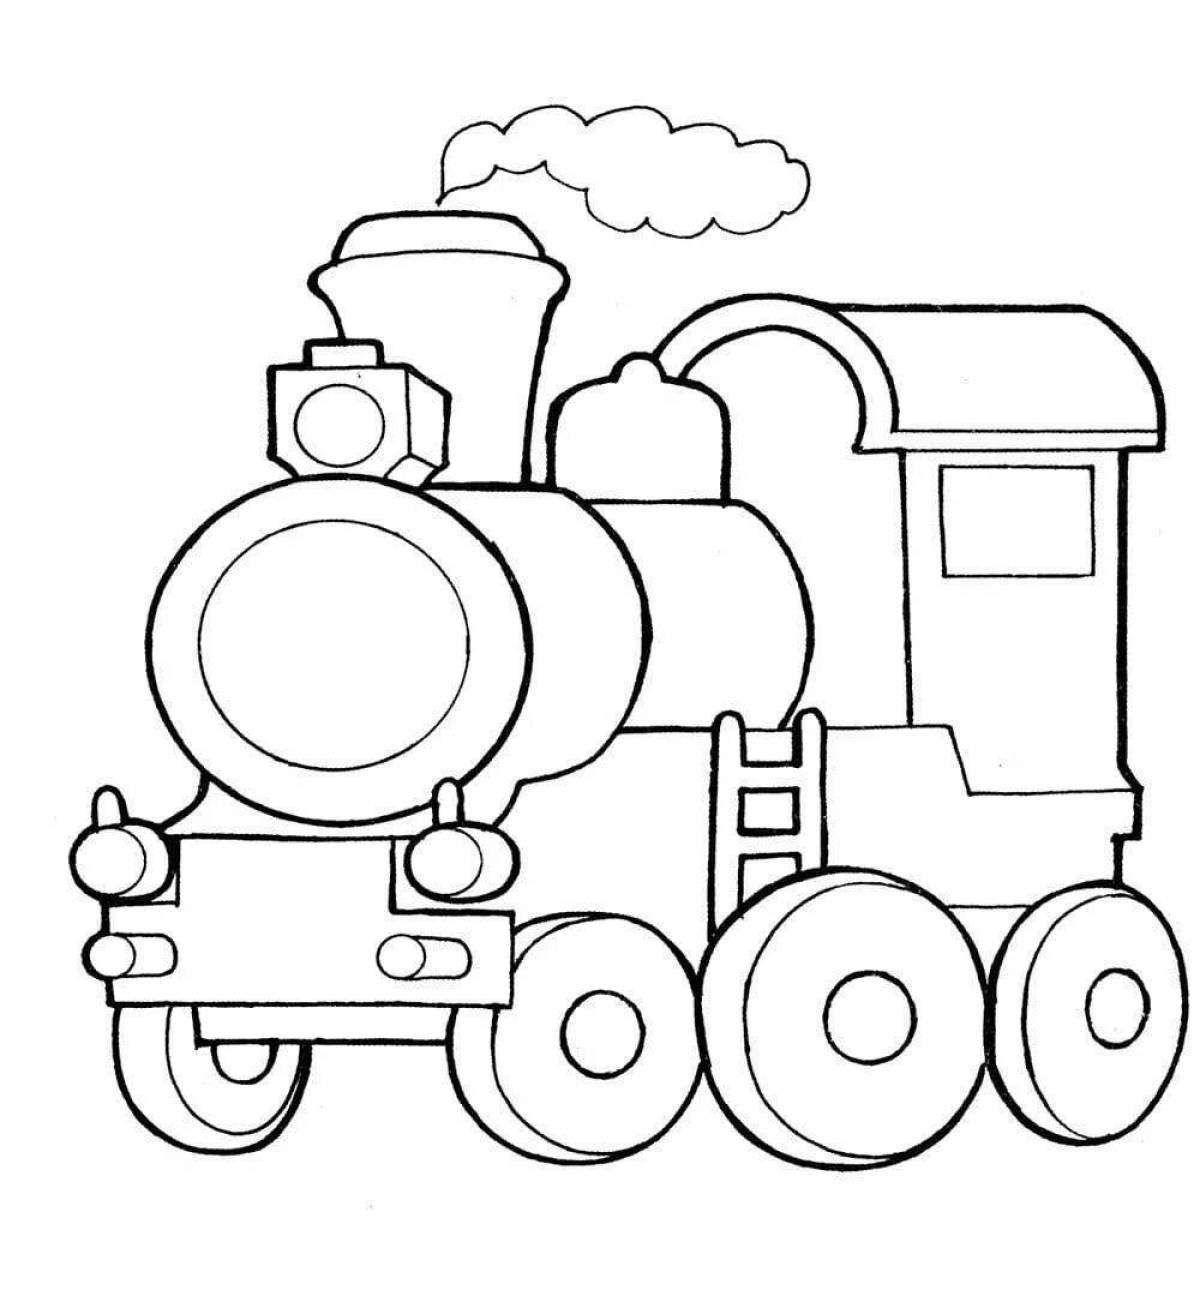 Coloring pages for kids for kids #19